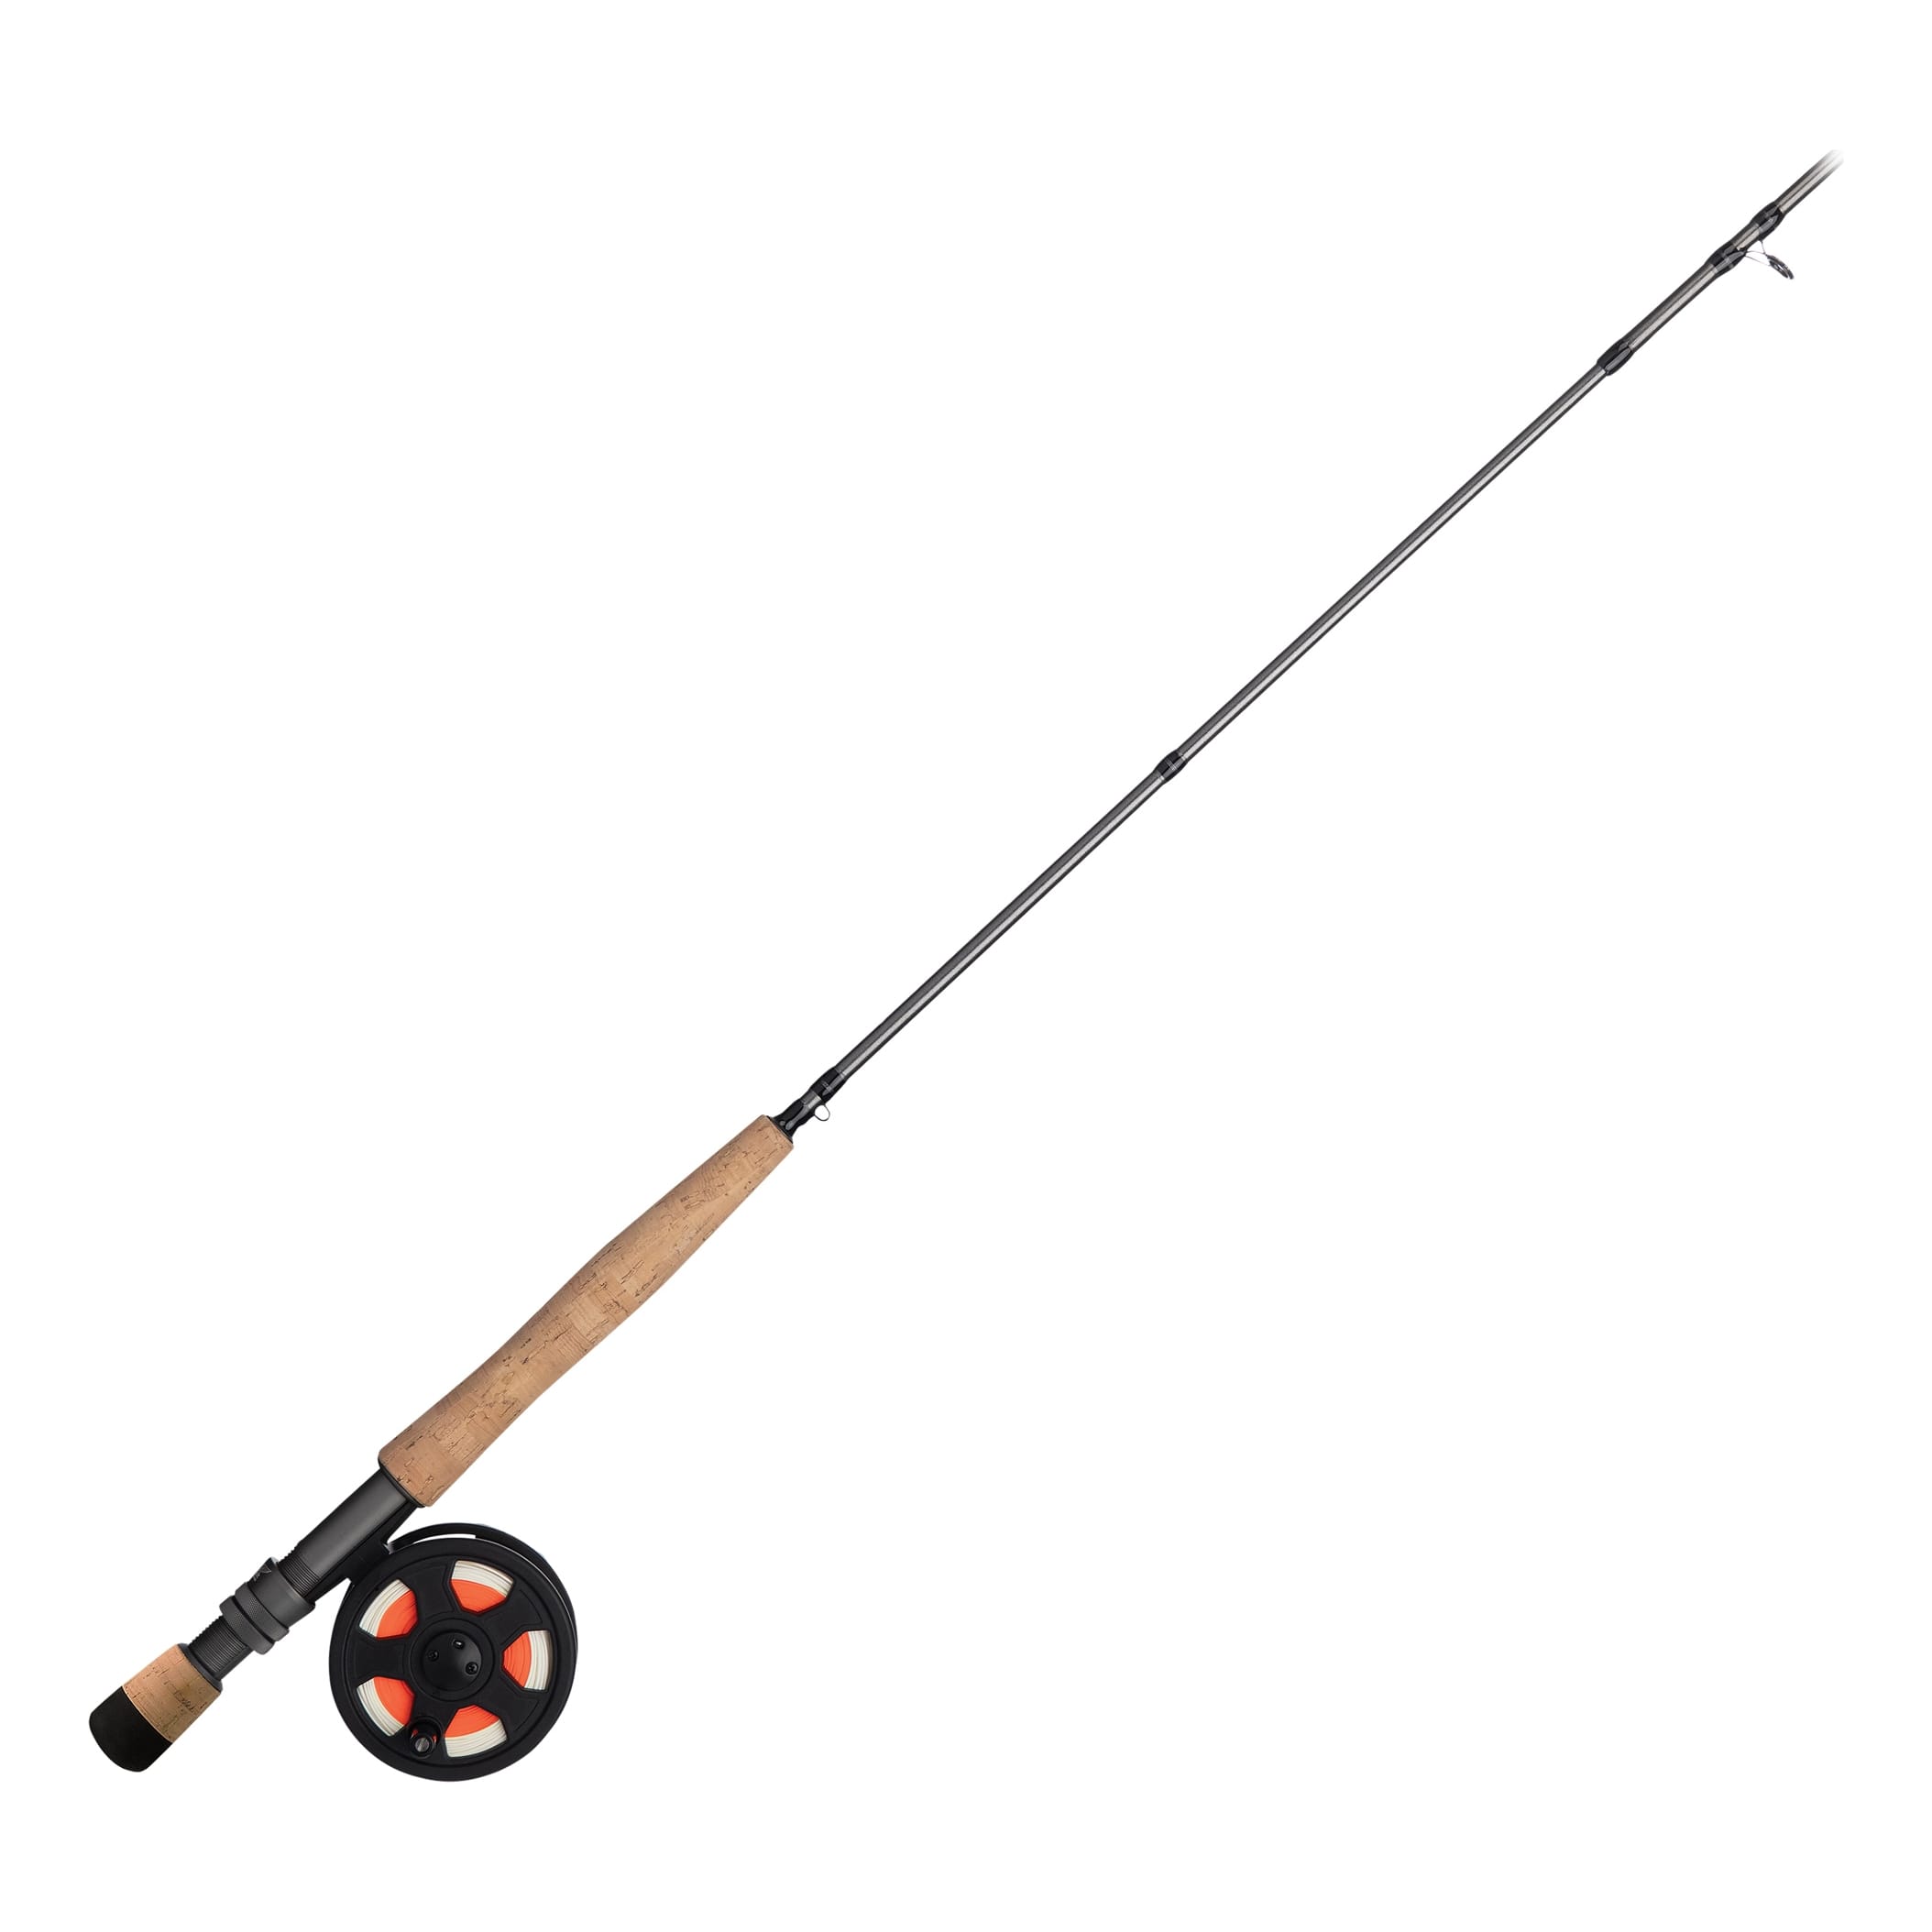 Orvis Clearwater Fly Rod Outfit - 5,6,8 Weight Fly Fishing Rod and Reel  Combo Starter Kit with Large Arbor Reel and Case, 8wt 9'0 4pc, Rod & Reel  Combos -  Canada